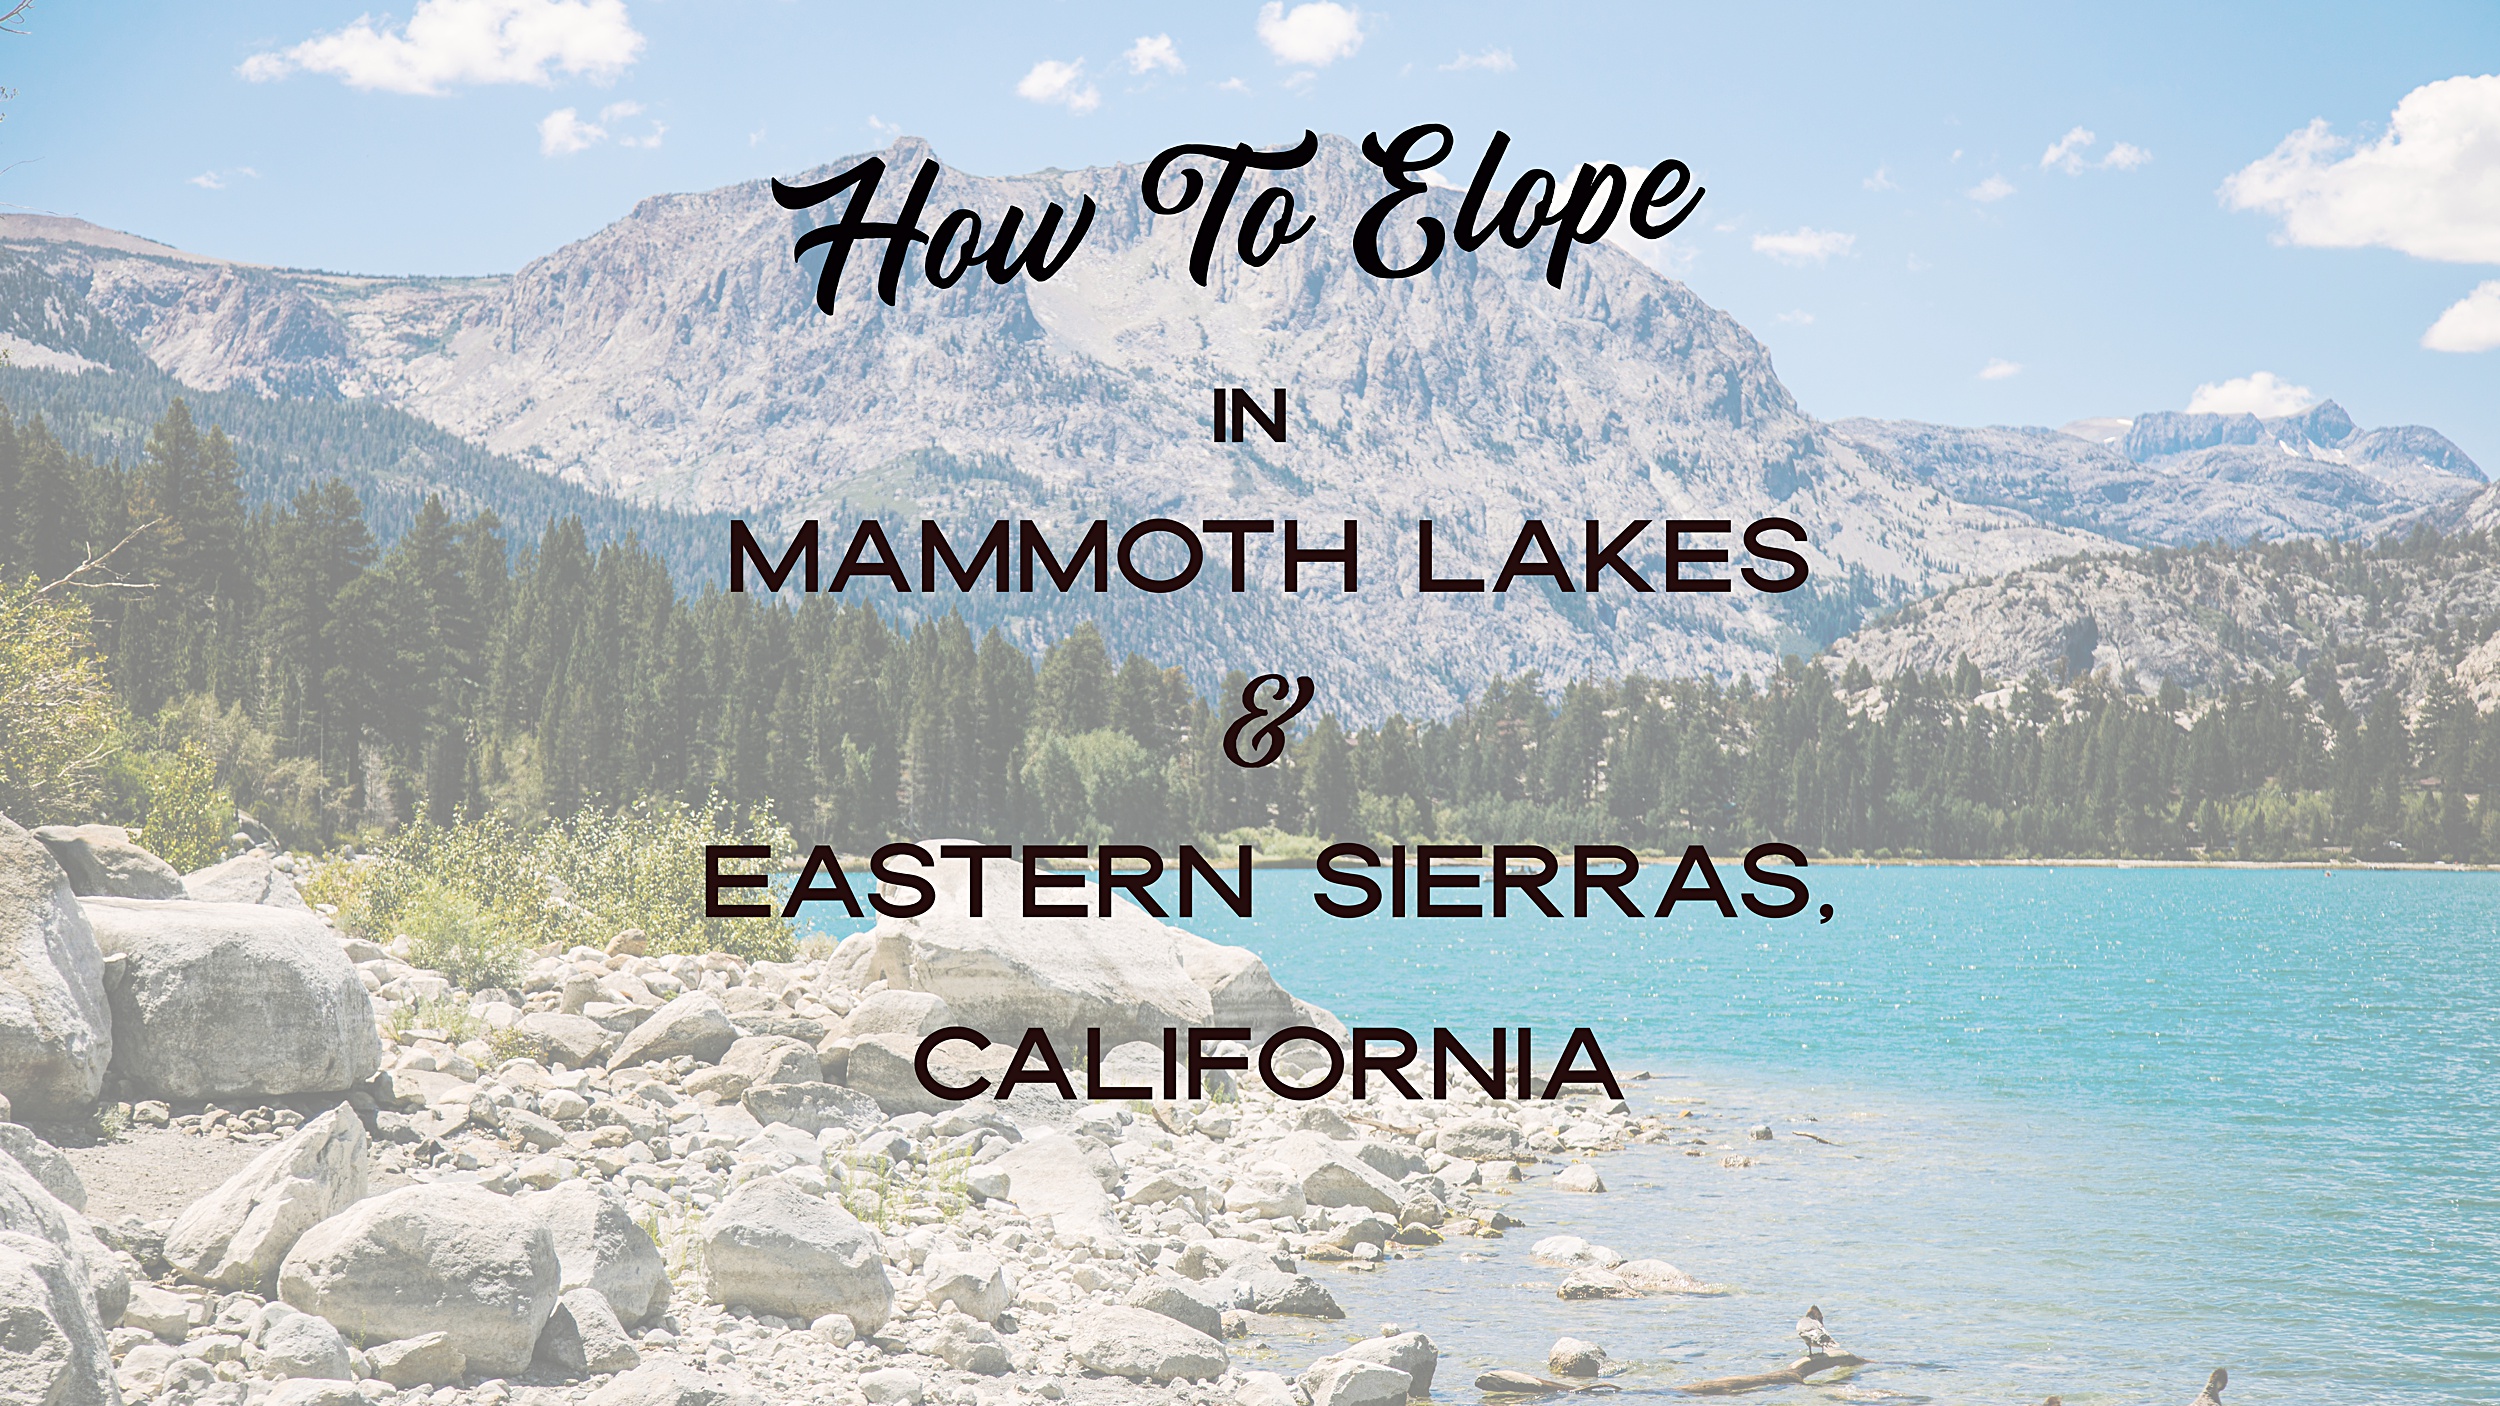 How-to-Elope-in-Mammoth-and-Eastern-sierras-1 How to have an Incredible Eastern Sierras and Mammoth Lake Elopement